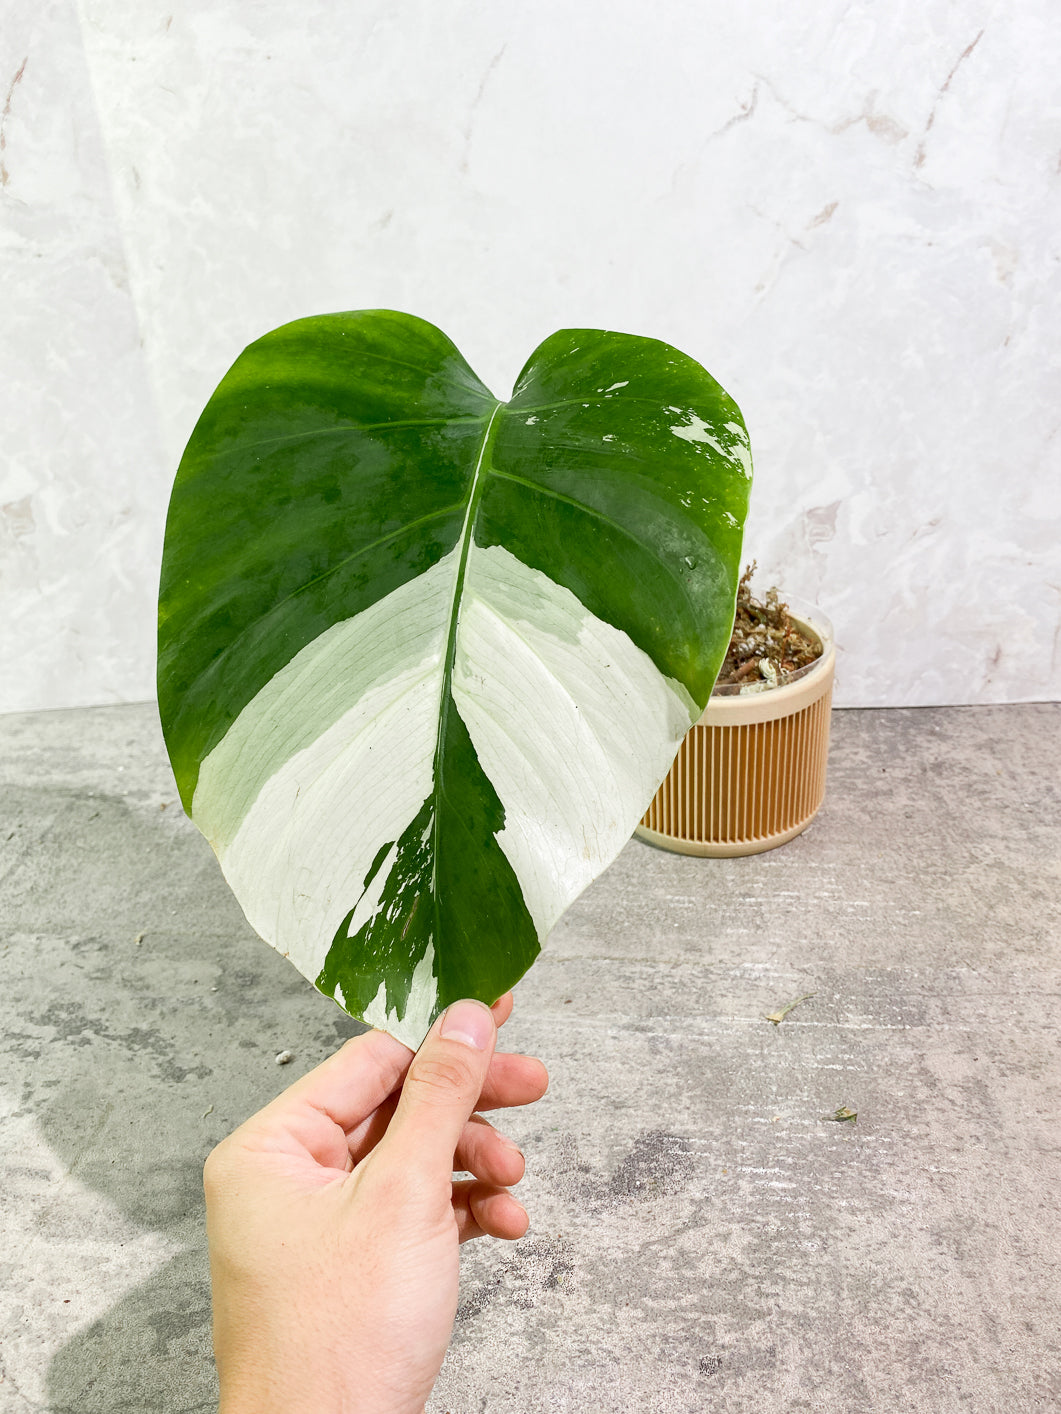 Monstera Mint 1 leaf 1 bud slightly rooted in moss